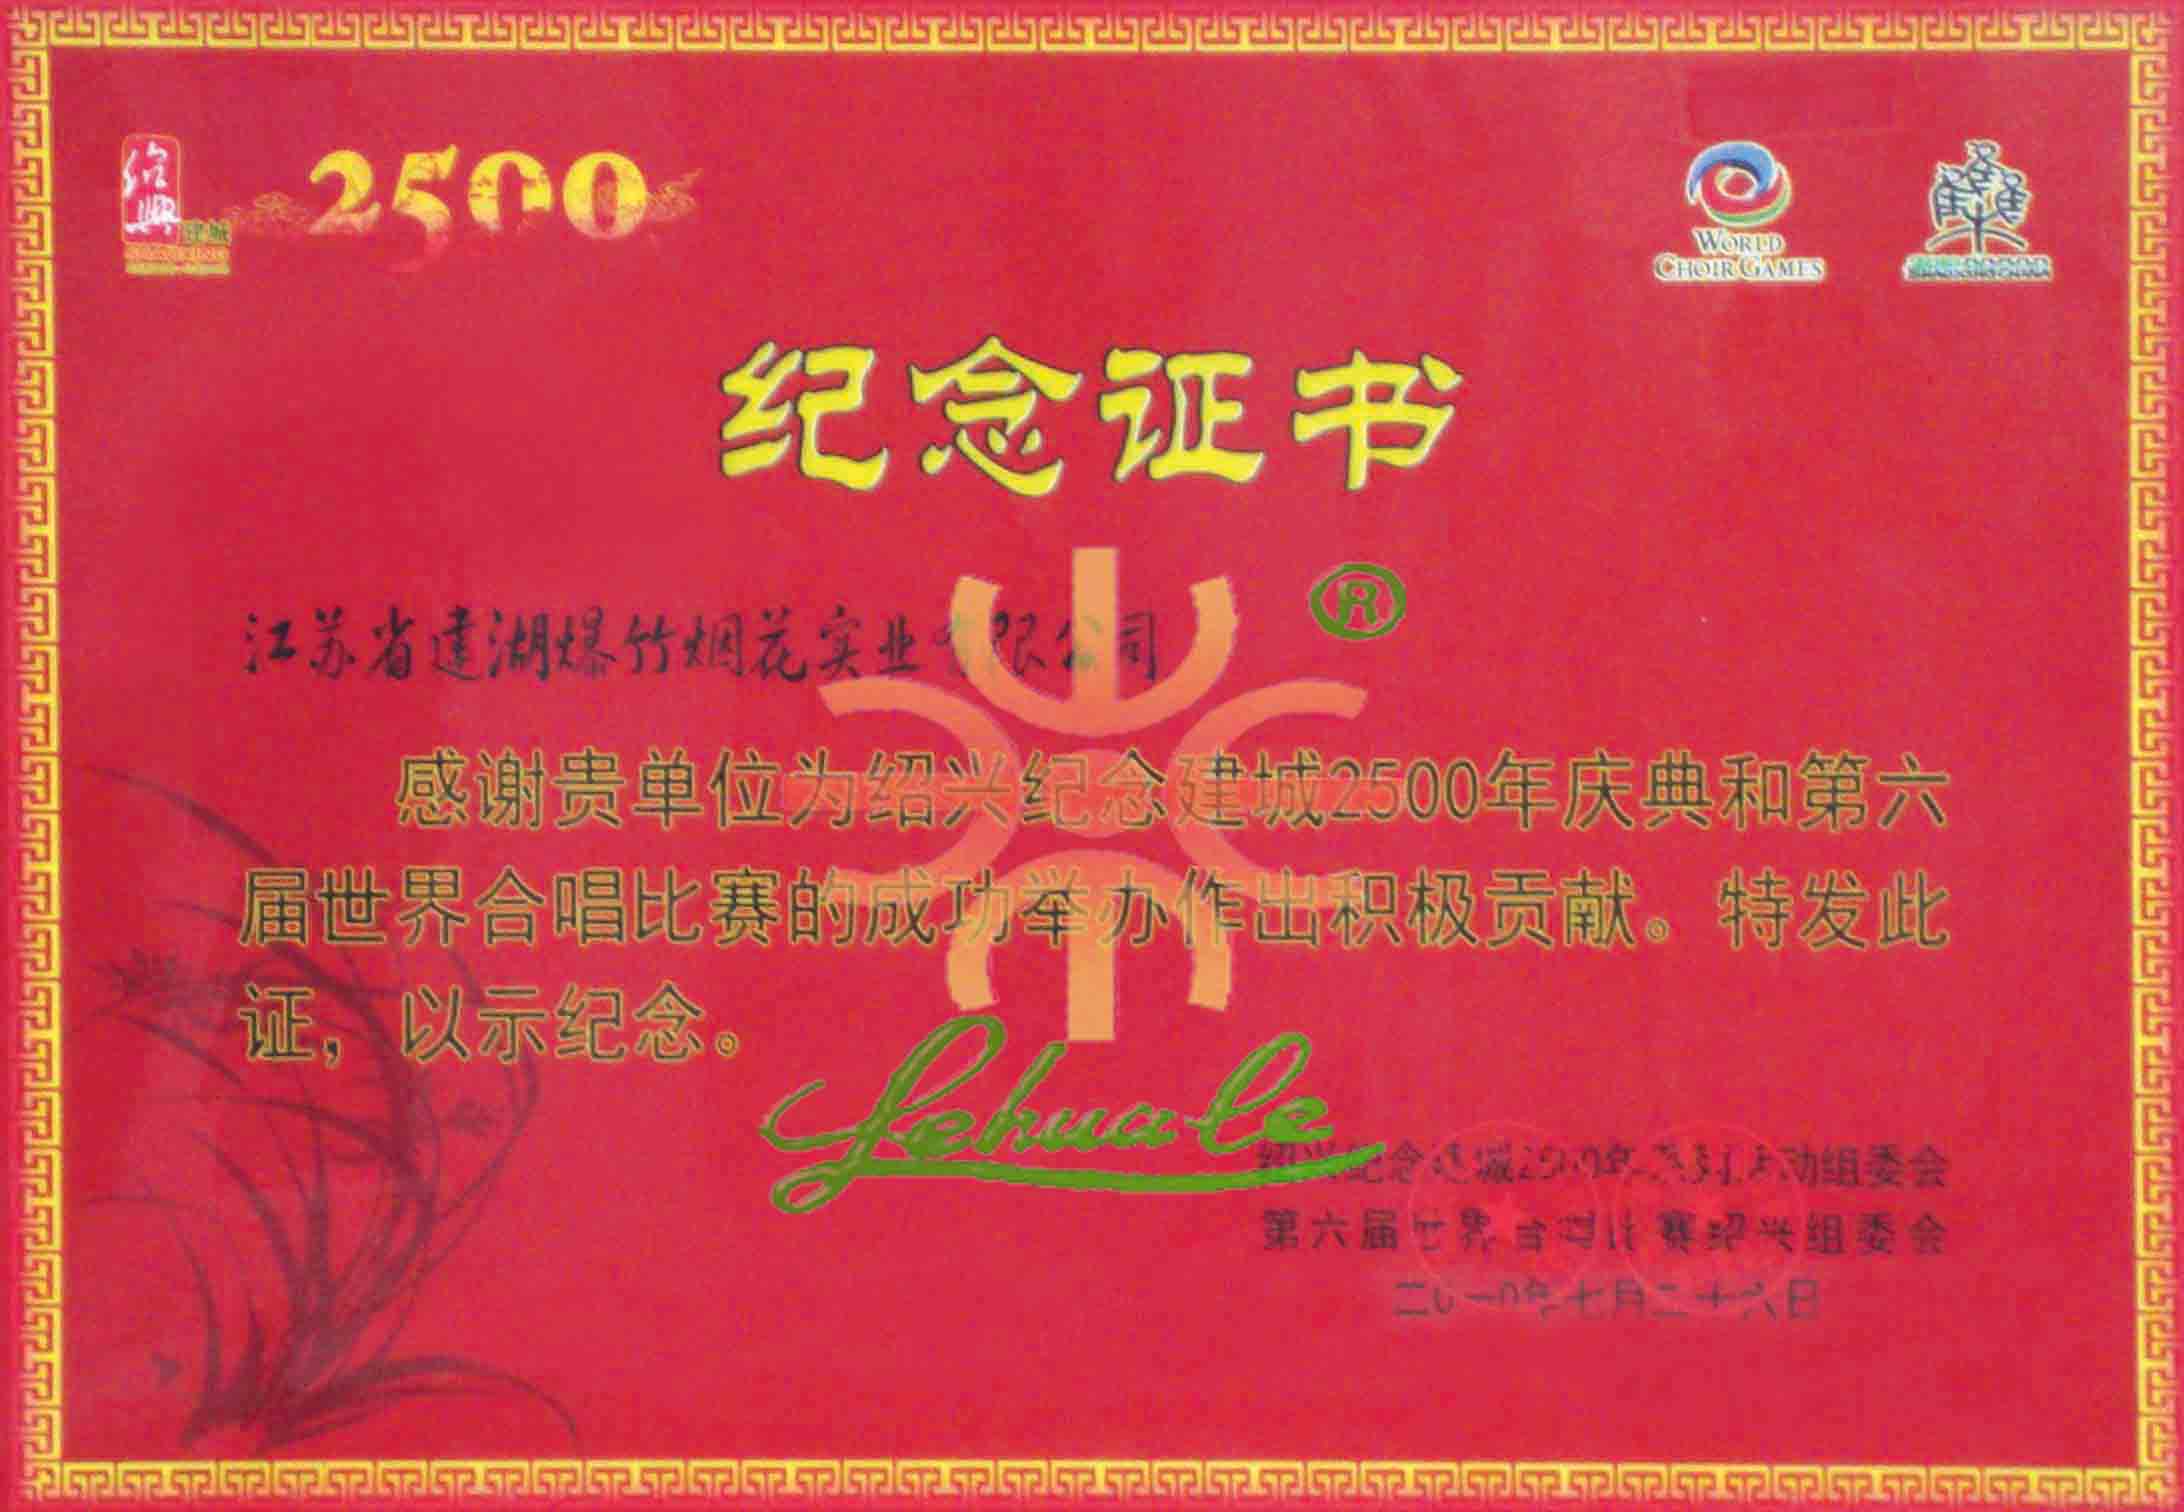 The Sixth World Choir Games and 2500th  anniversary of Shaoxing on Jul. 26, 2010